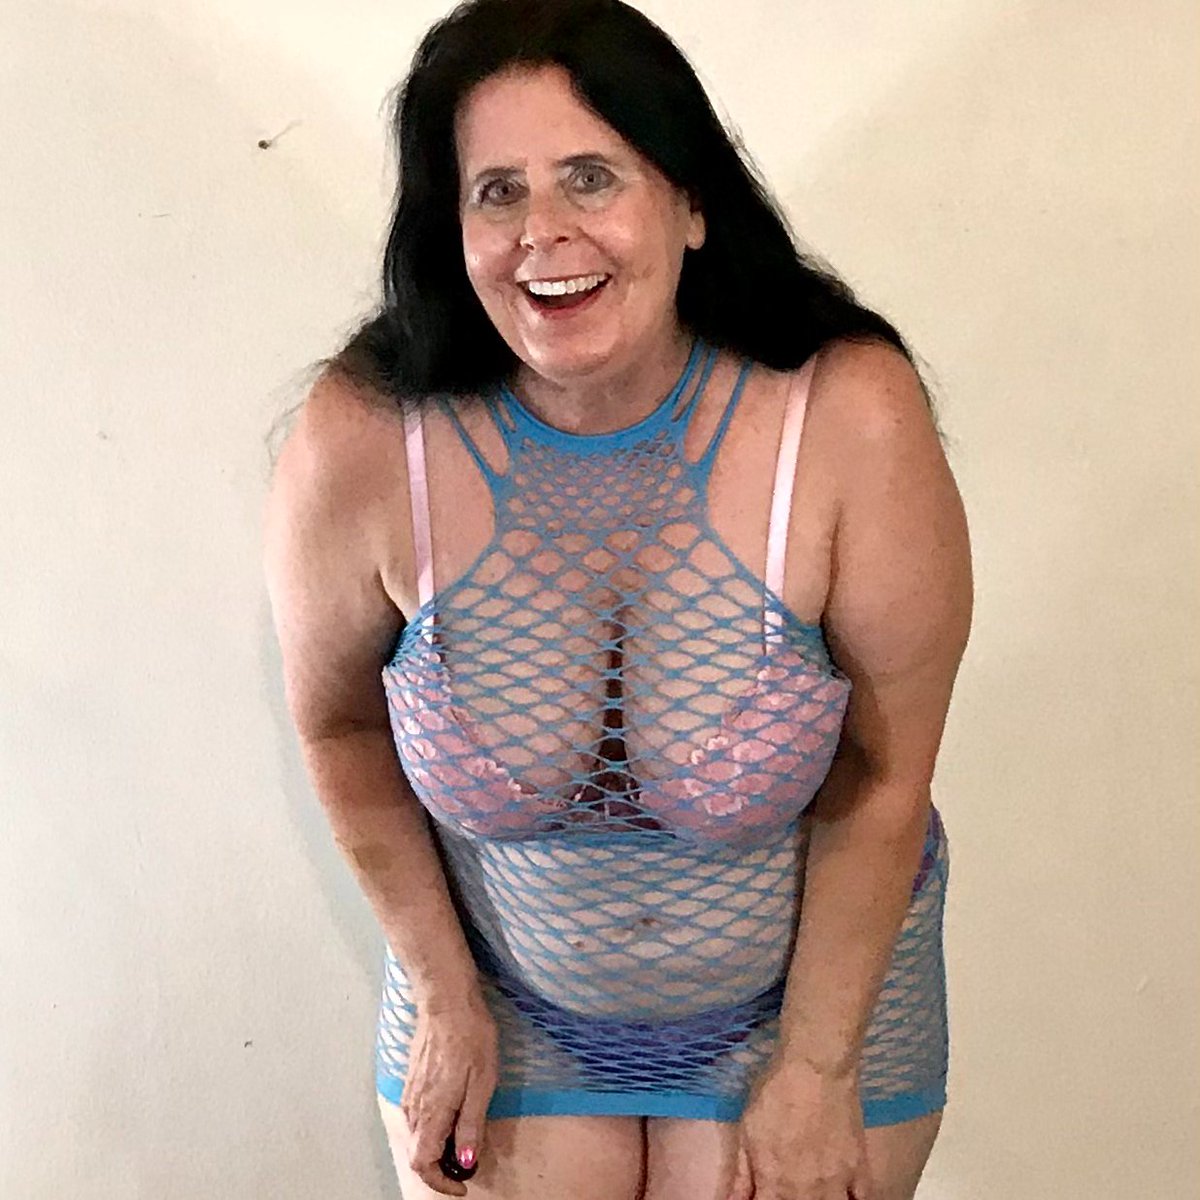 Mature only fans